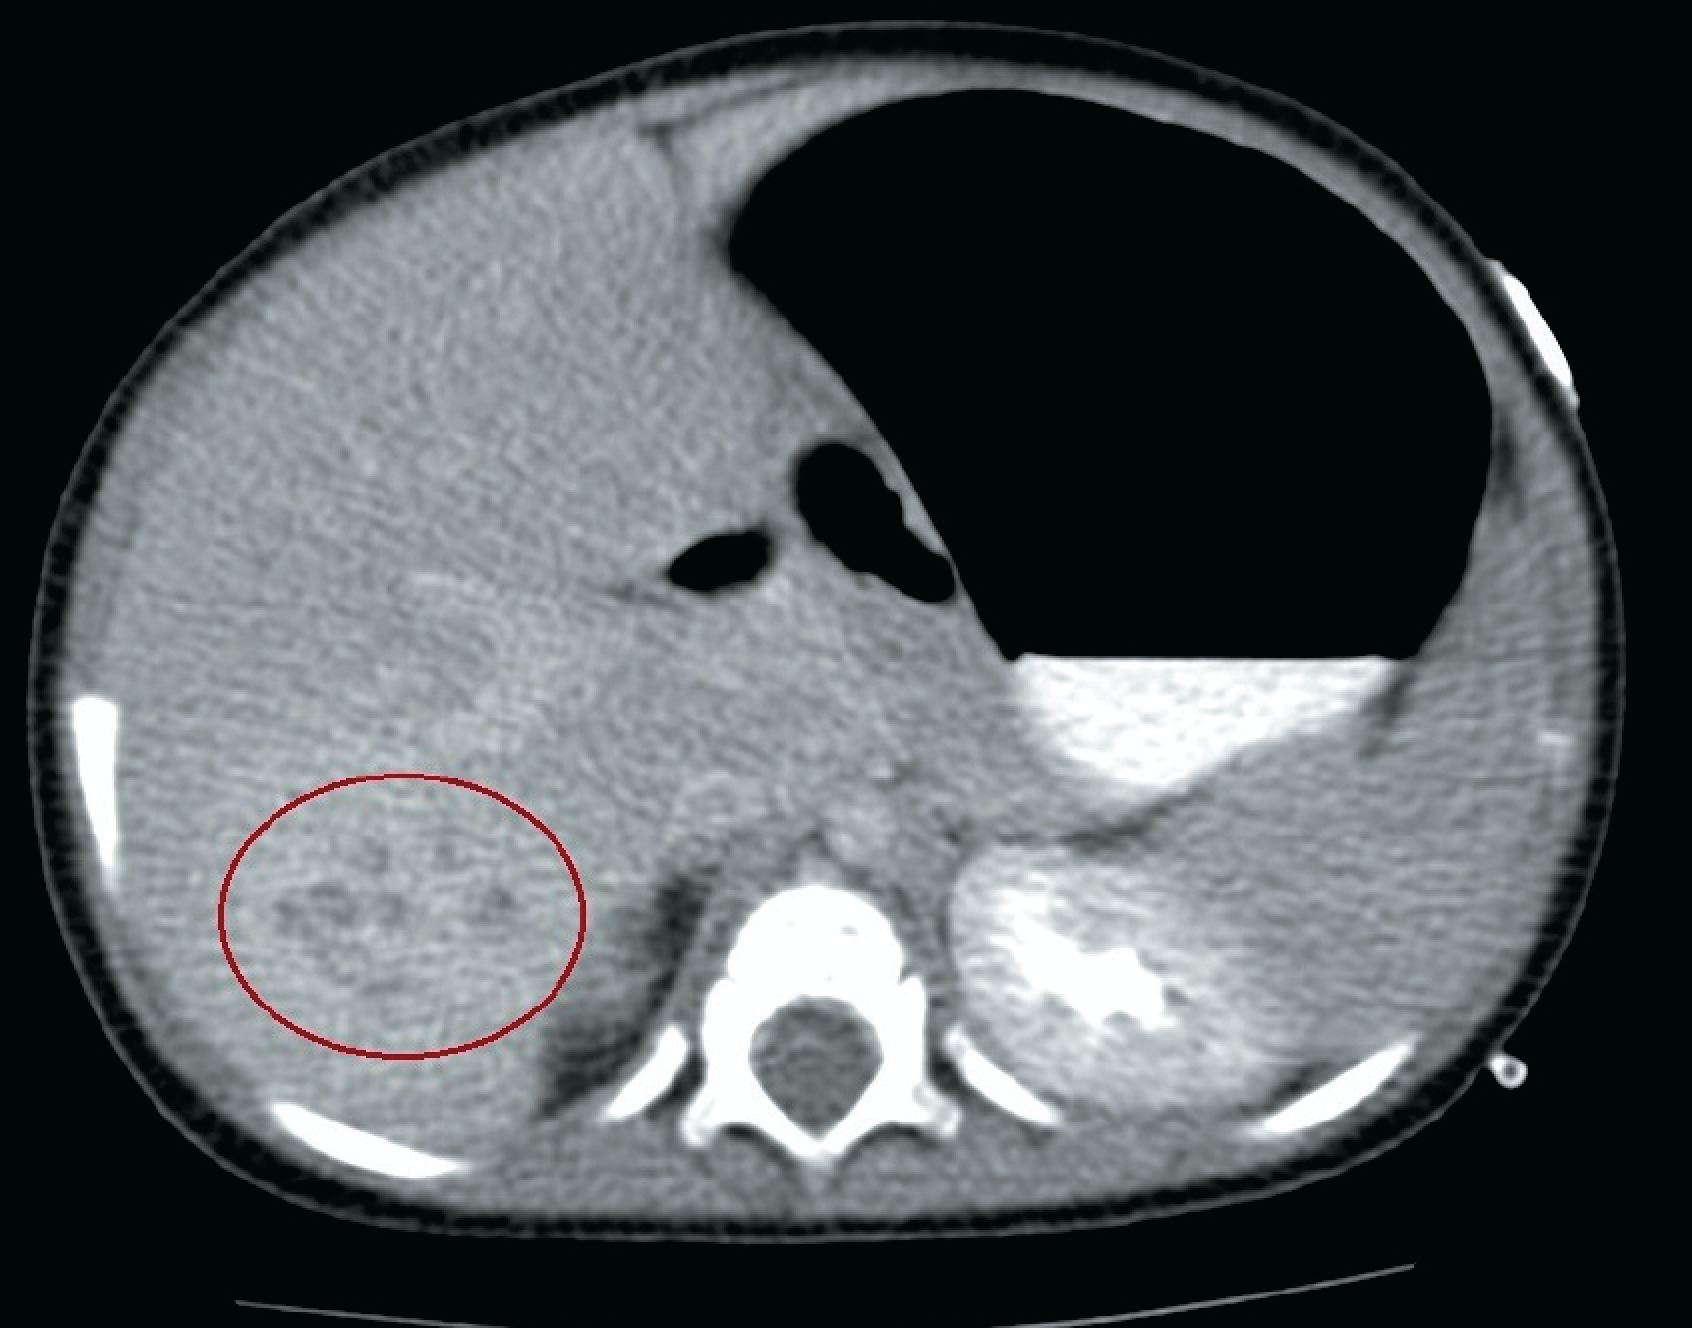 Infant with febrile neutropenia and a hepatic mass